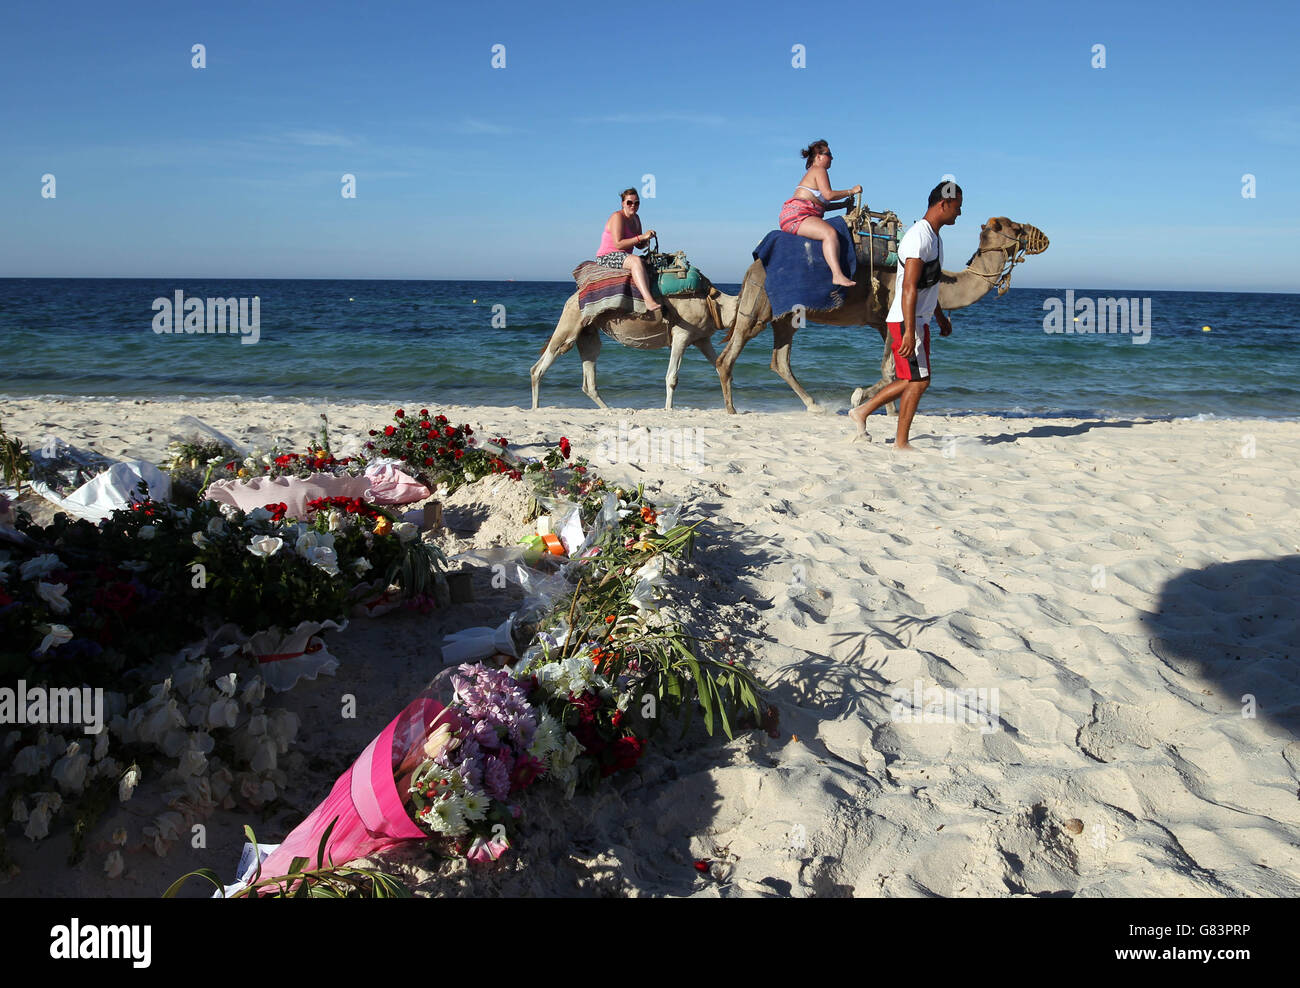 People on camels pass tributes on the beach near the RIU Imperial Marhaba hotel in Sousse, Tunisia, as British holidaymakers defy the terrorists and continue to stay in Sousse despite the bloodbath on the beach. PRESS ASSOCIATION Photo. Picture date: Tuesday June 30, 2015. The sands at Sousse were quiet and calm today as tourists and locals alike continued to pay their respects to the 38 dead outside the RIU Imperial Marhaba and Bellevue hotels. Flowers continue to be laid at three heart-shaped memorials that mark where so many people lost their lives, with many people in tears as they read Stock Photo